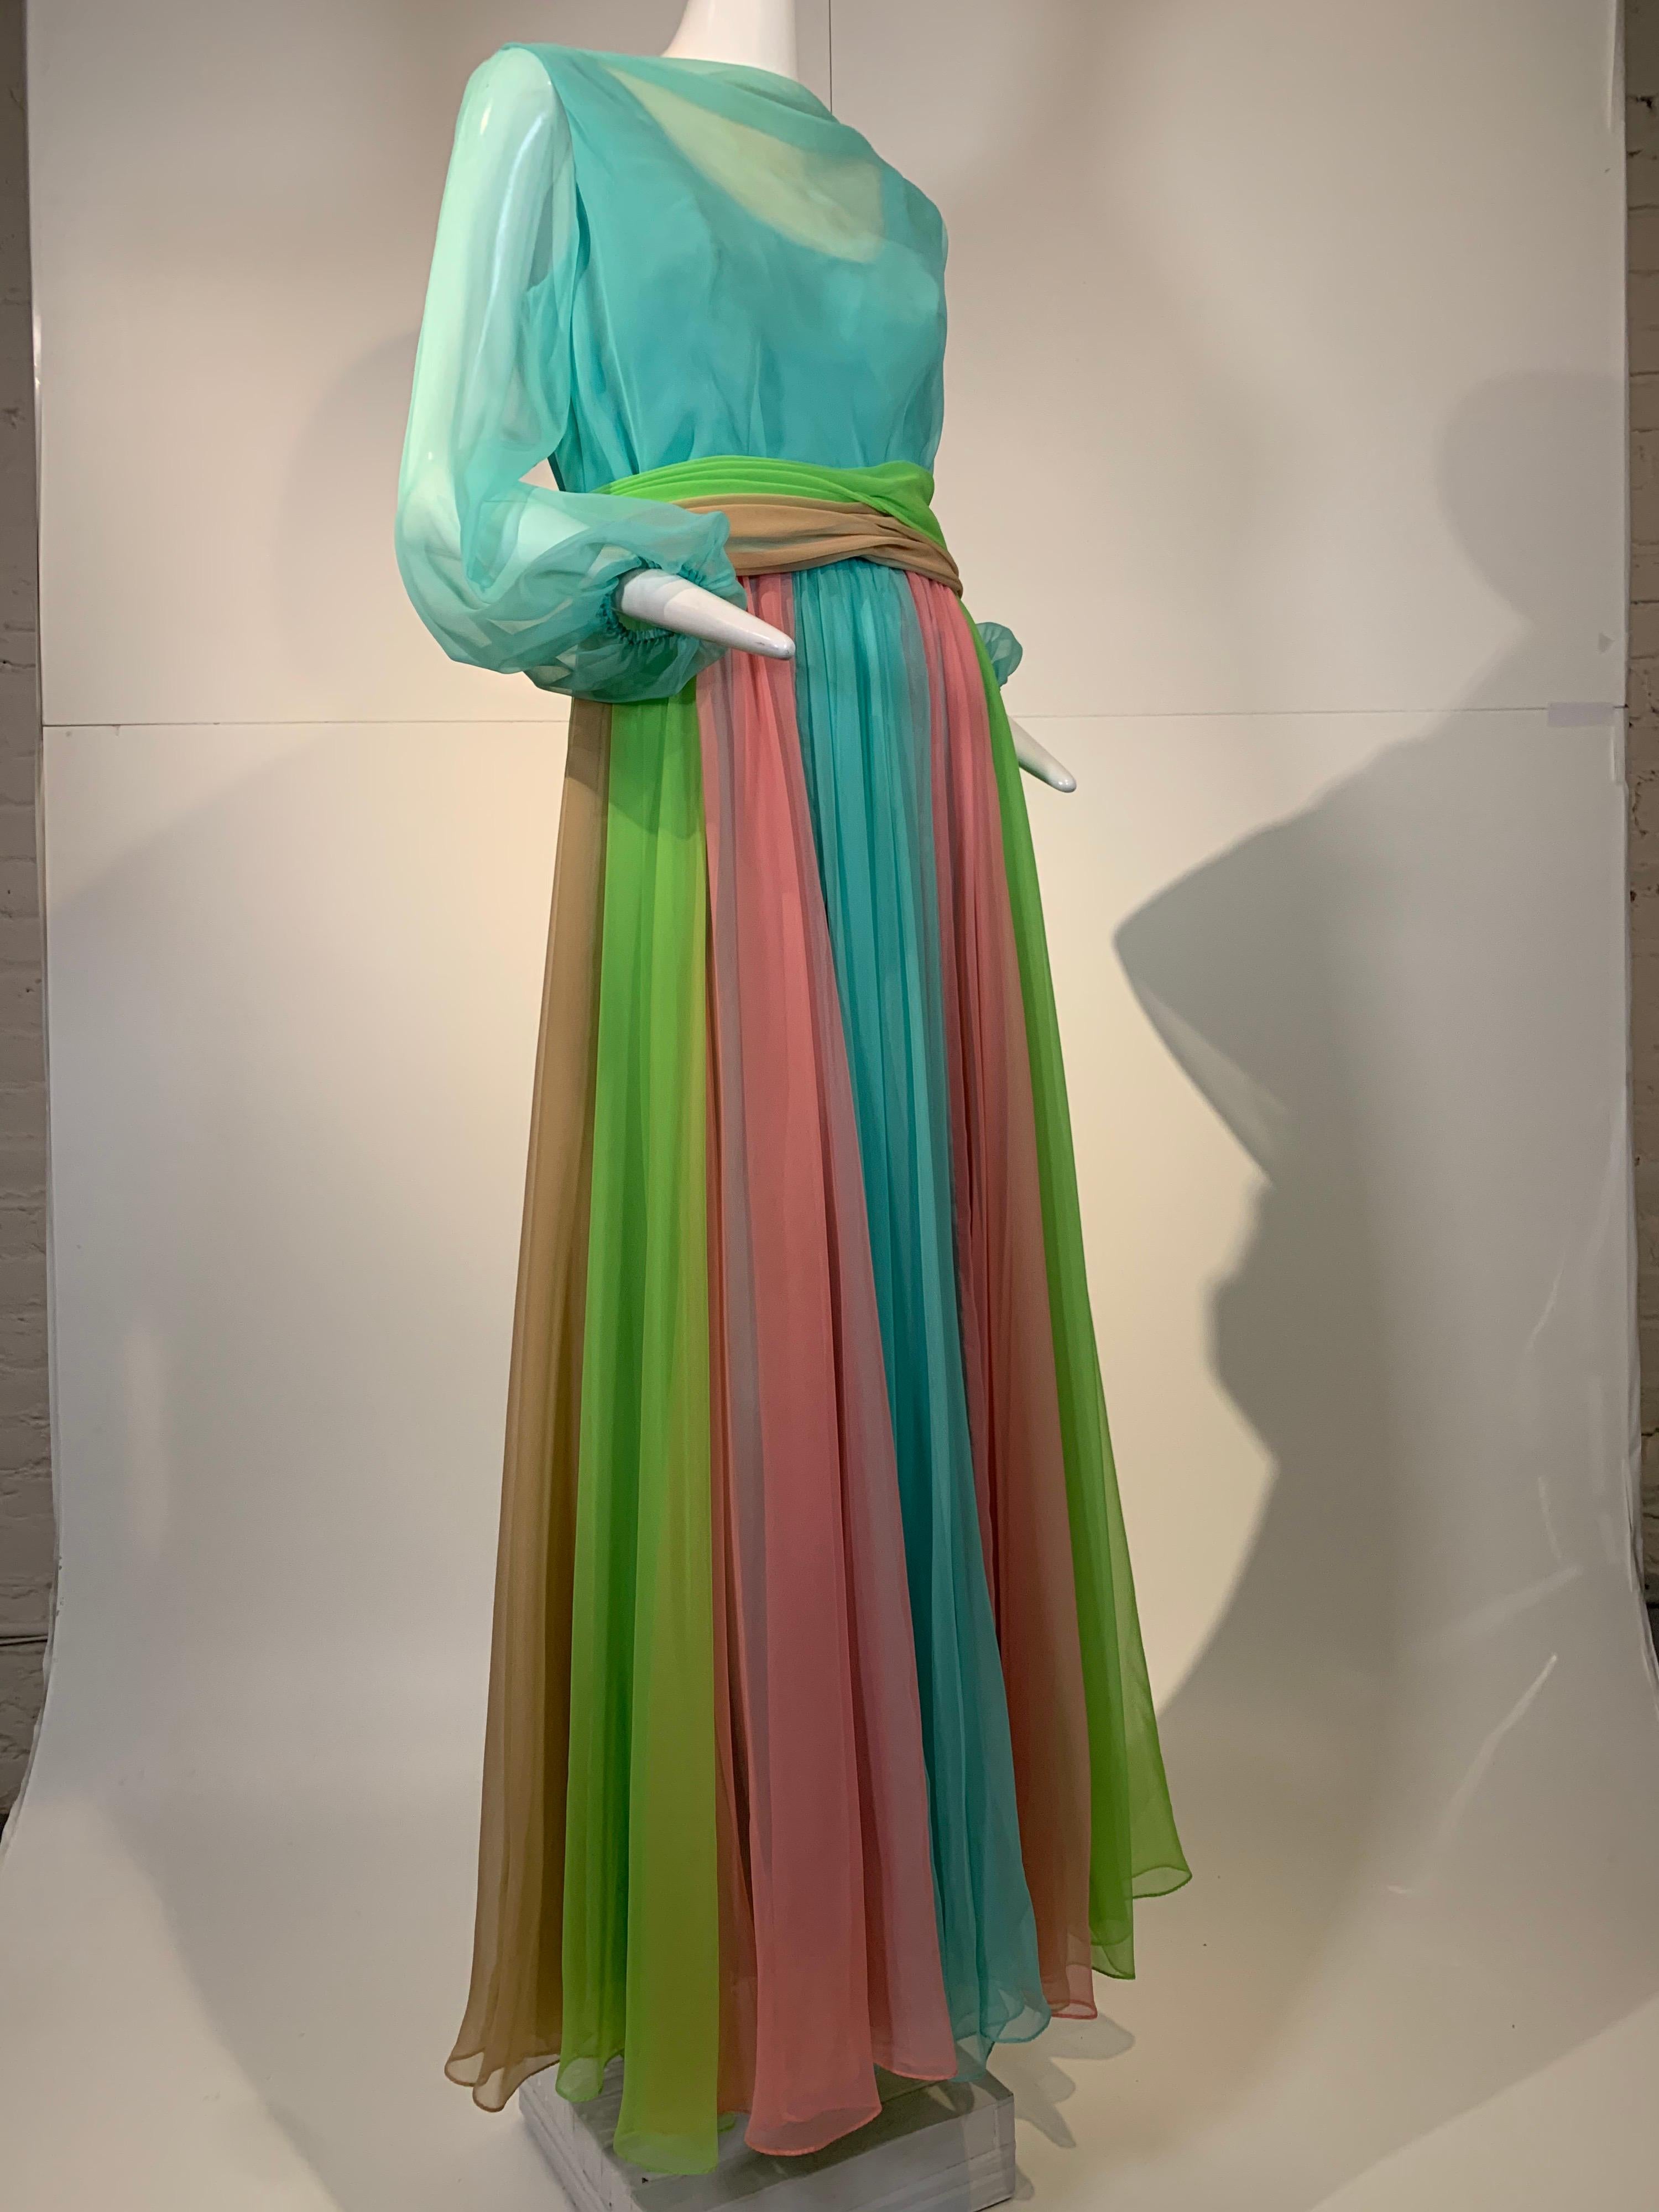 Gorgeous 1970s Helen Rose color-blocked chiffon gown in robin's egg blue, pink and chartreuse. Cummerbund-styled waist sash with buttons at back, bodice is a sheer overlay of chiffon with balloon sleeves. Lined skirt. Size 10. 